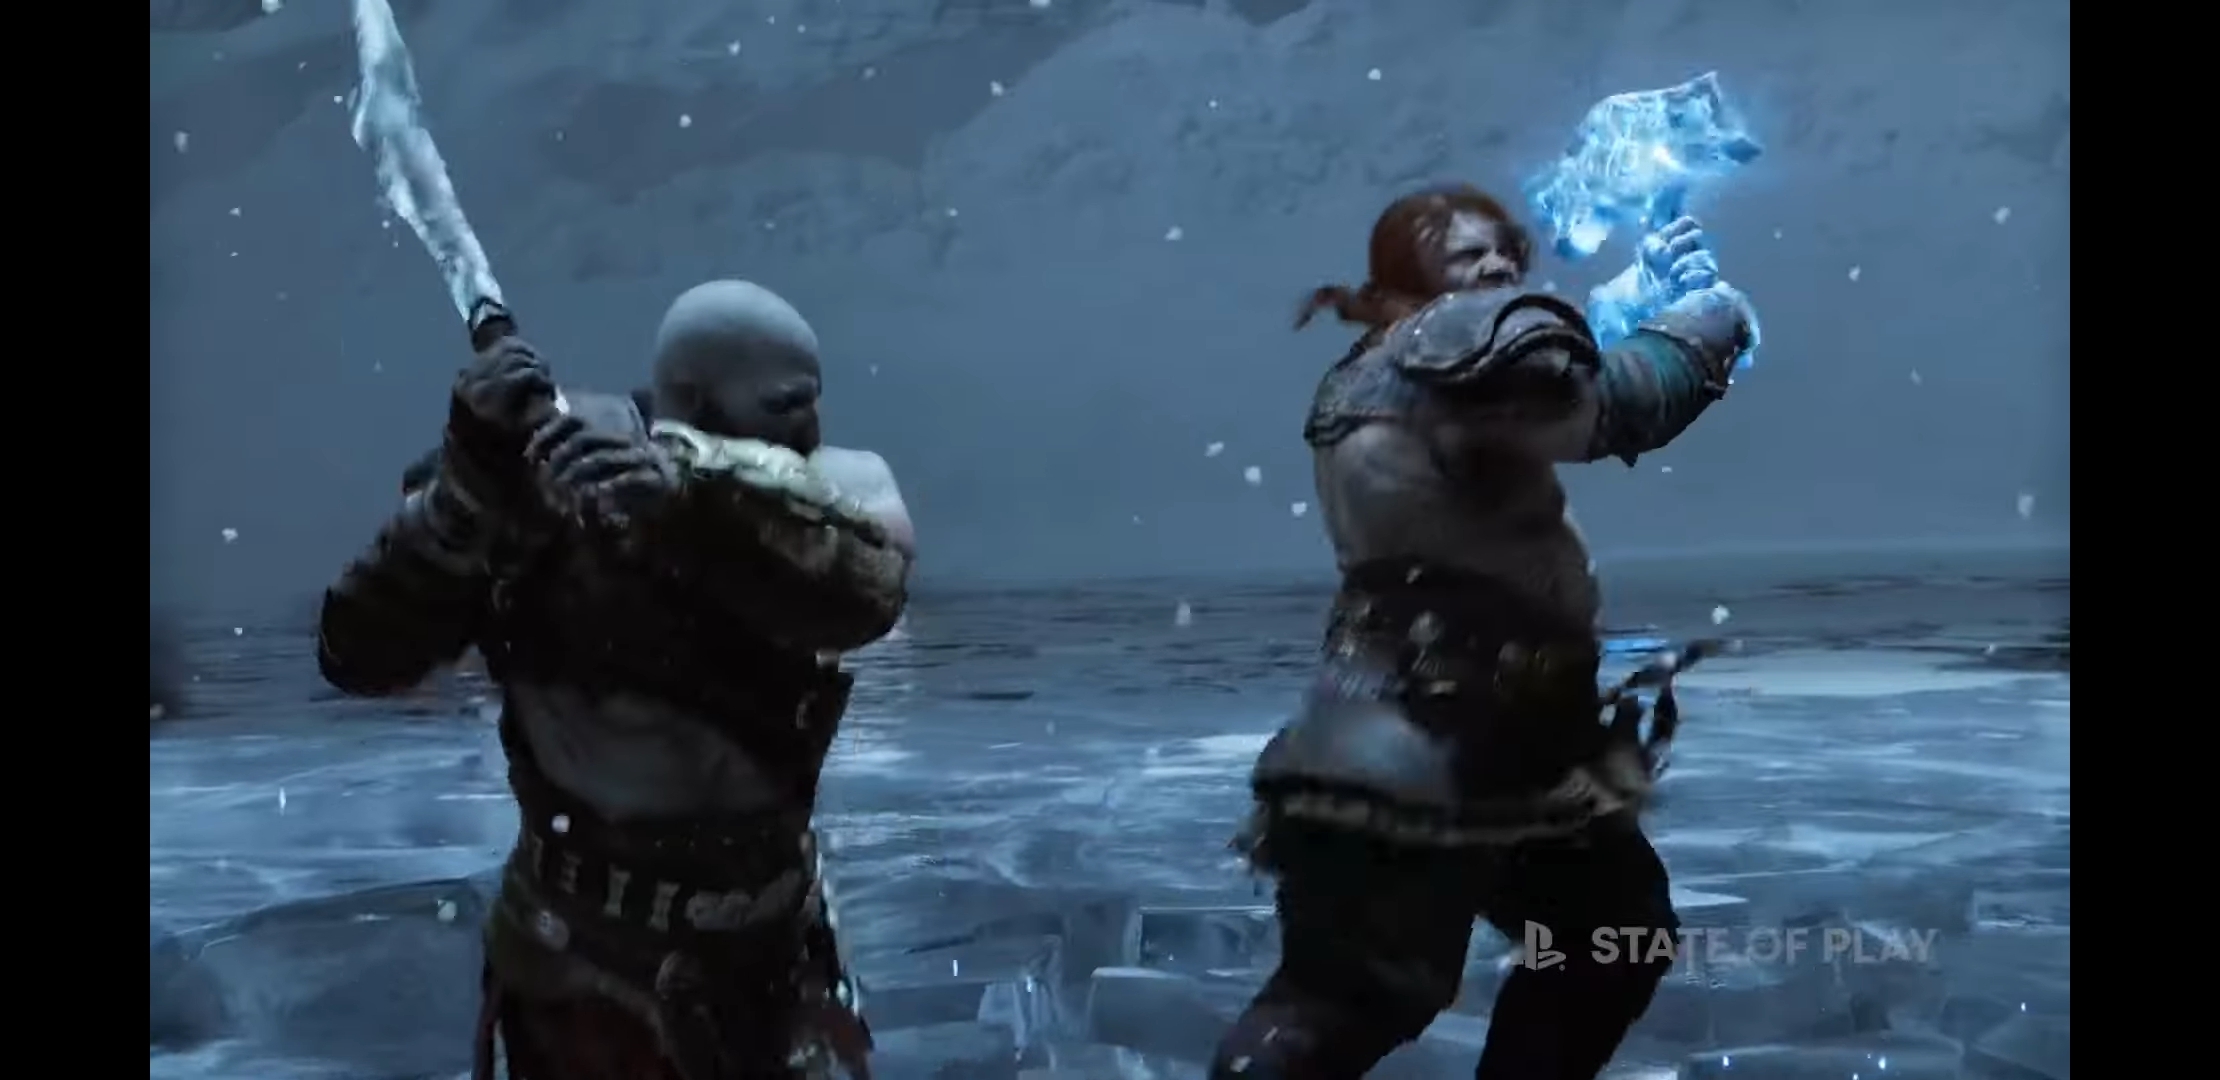 Kratos and Deimos vs. Thor and Baldur, what are your thoughts? : r